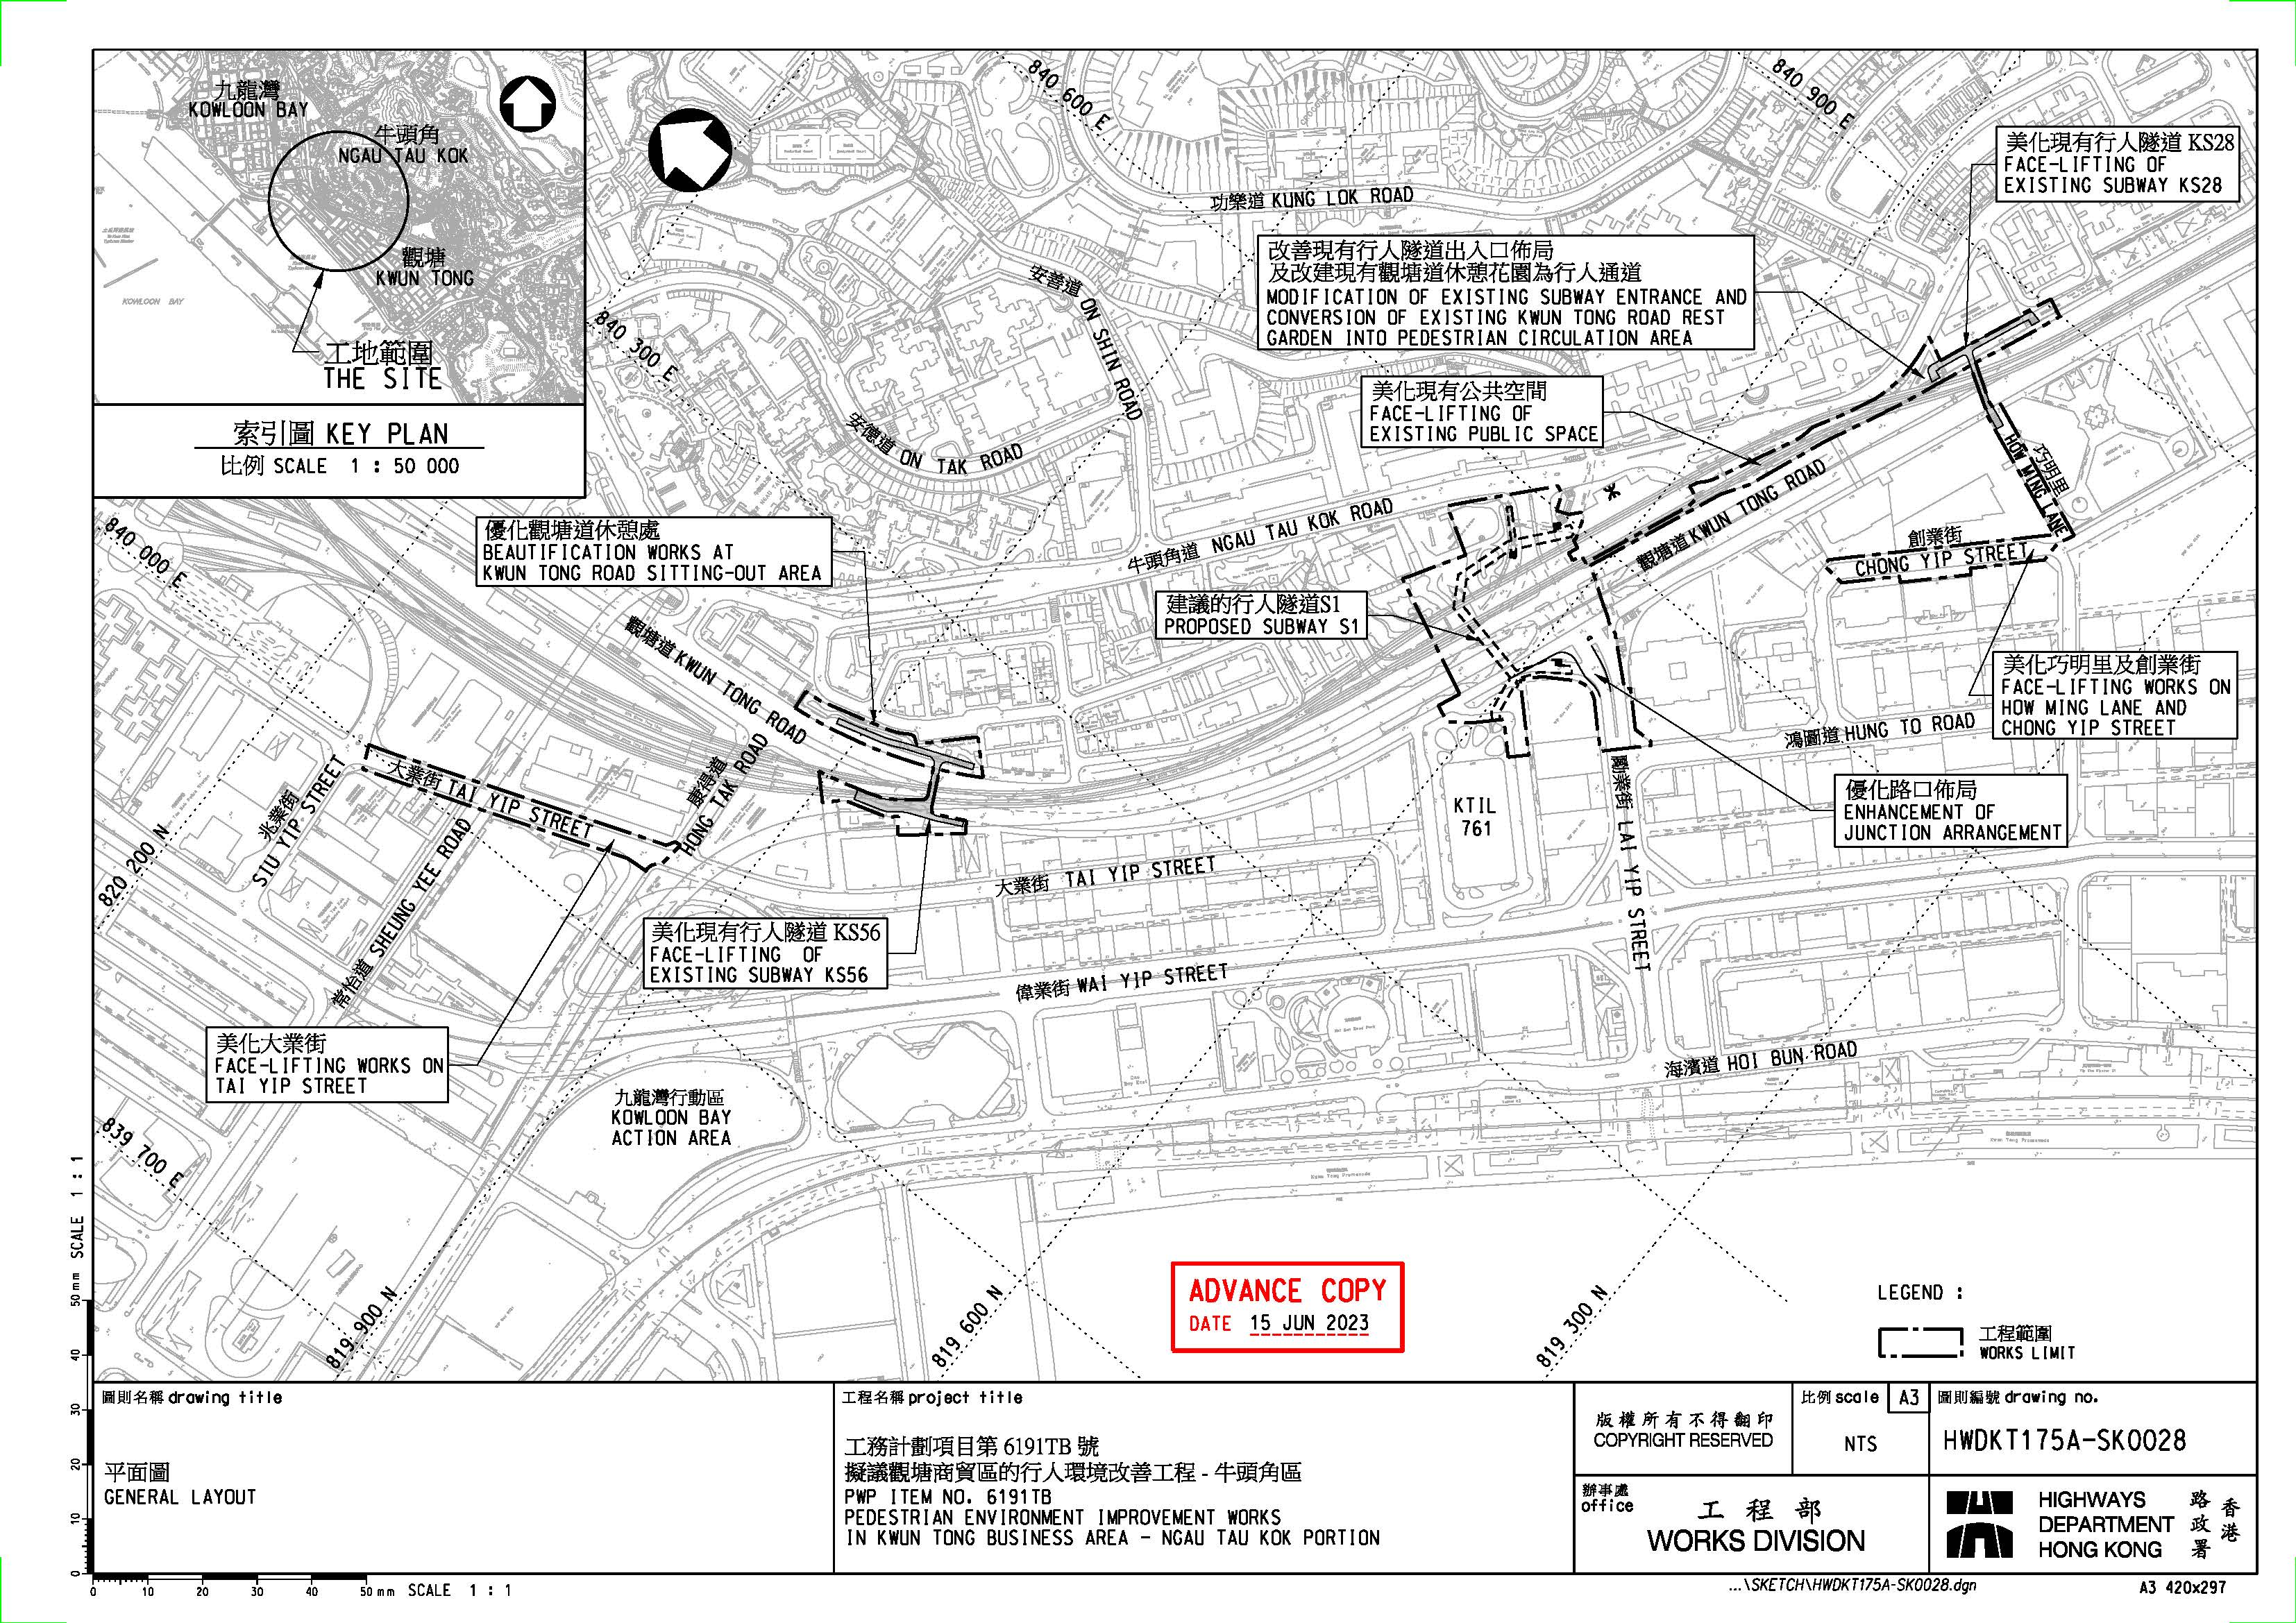 Layout Plan of Proposed Pedestrian Environment Improvement Works in Kwun Tong Business Area – Ngau Tau Kok Portion